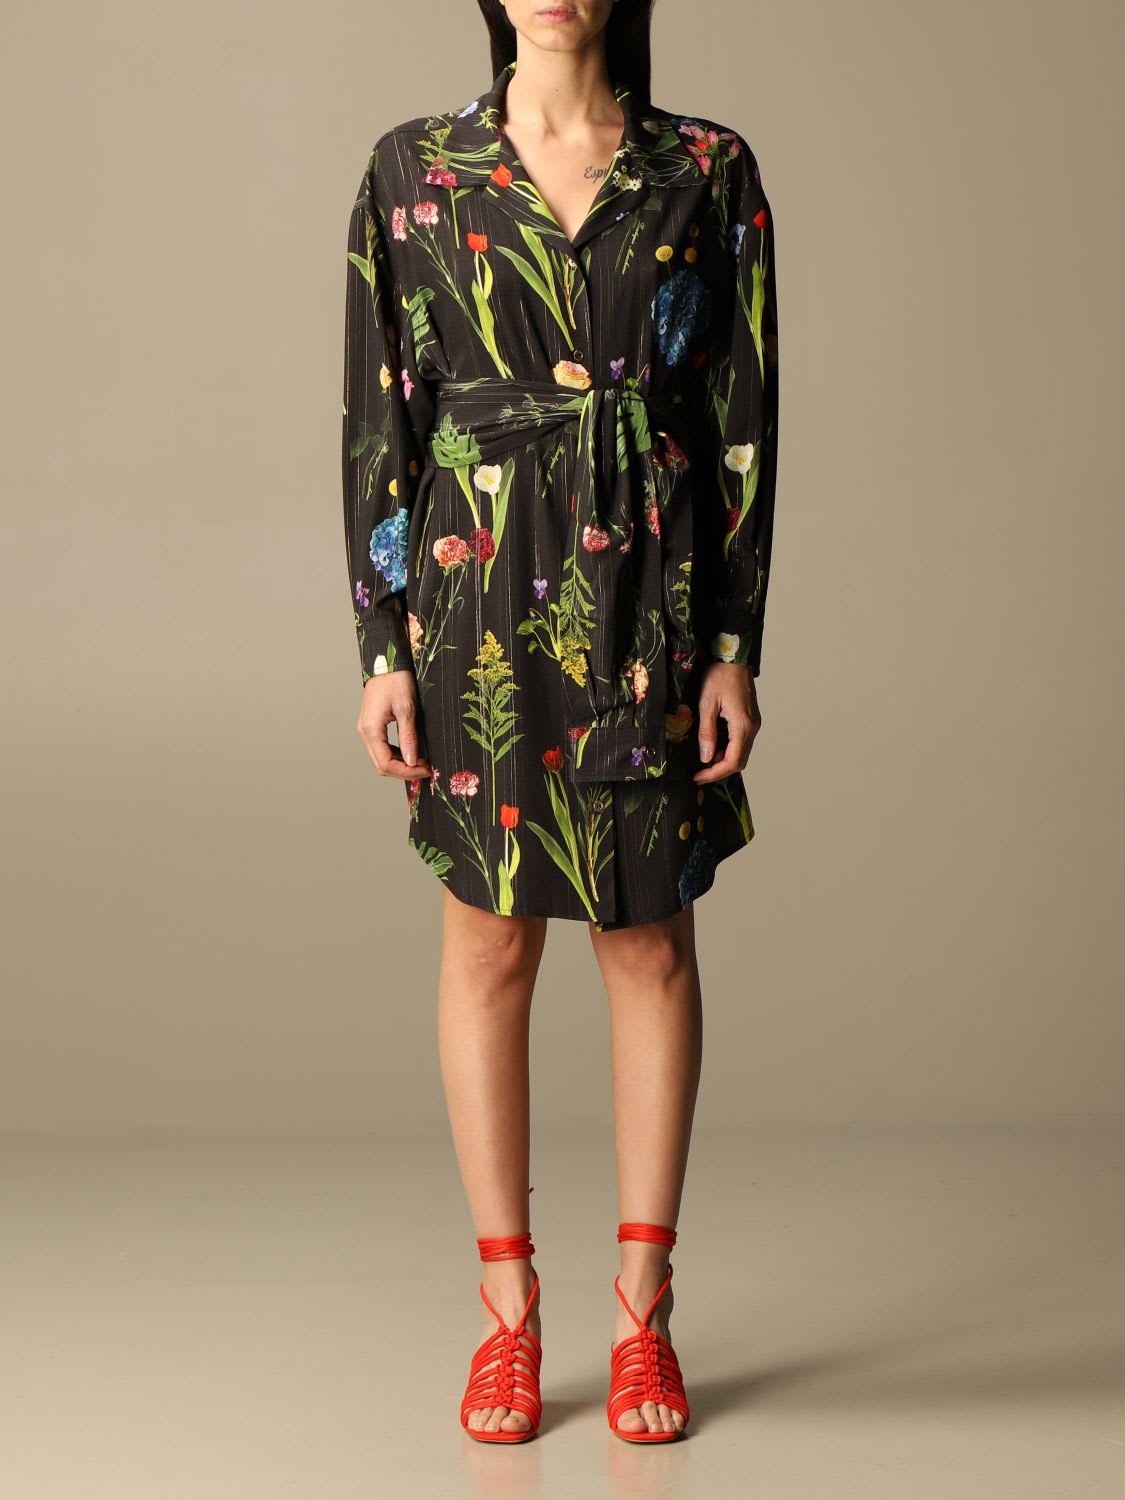 Boutique Moschino Dress Moschino Boutique Dress With Botanical Pattern